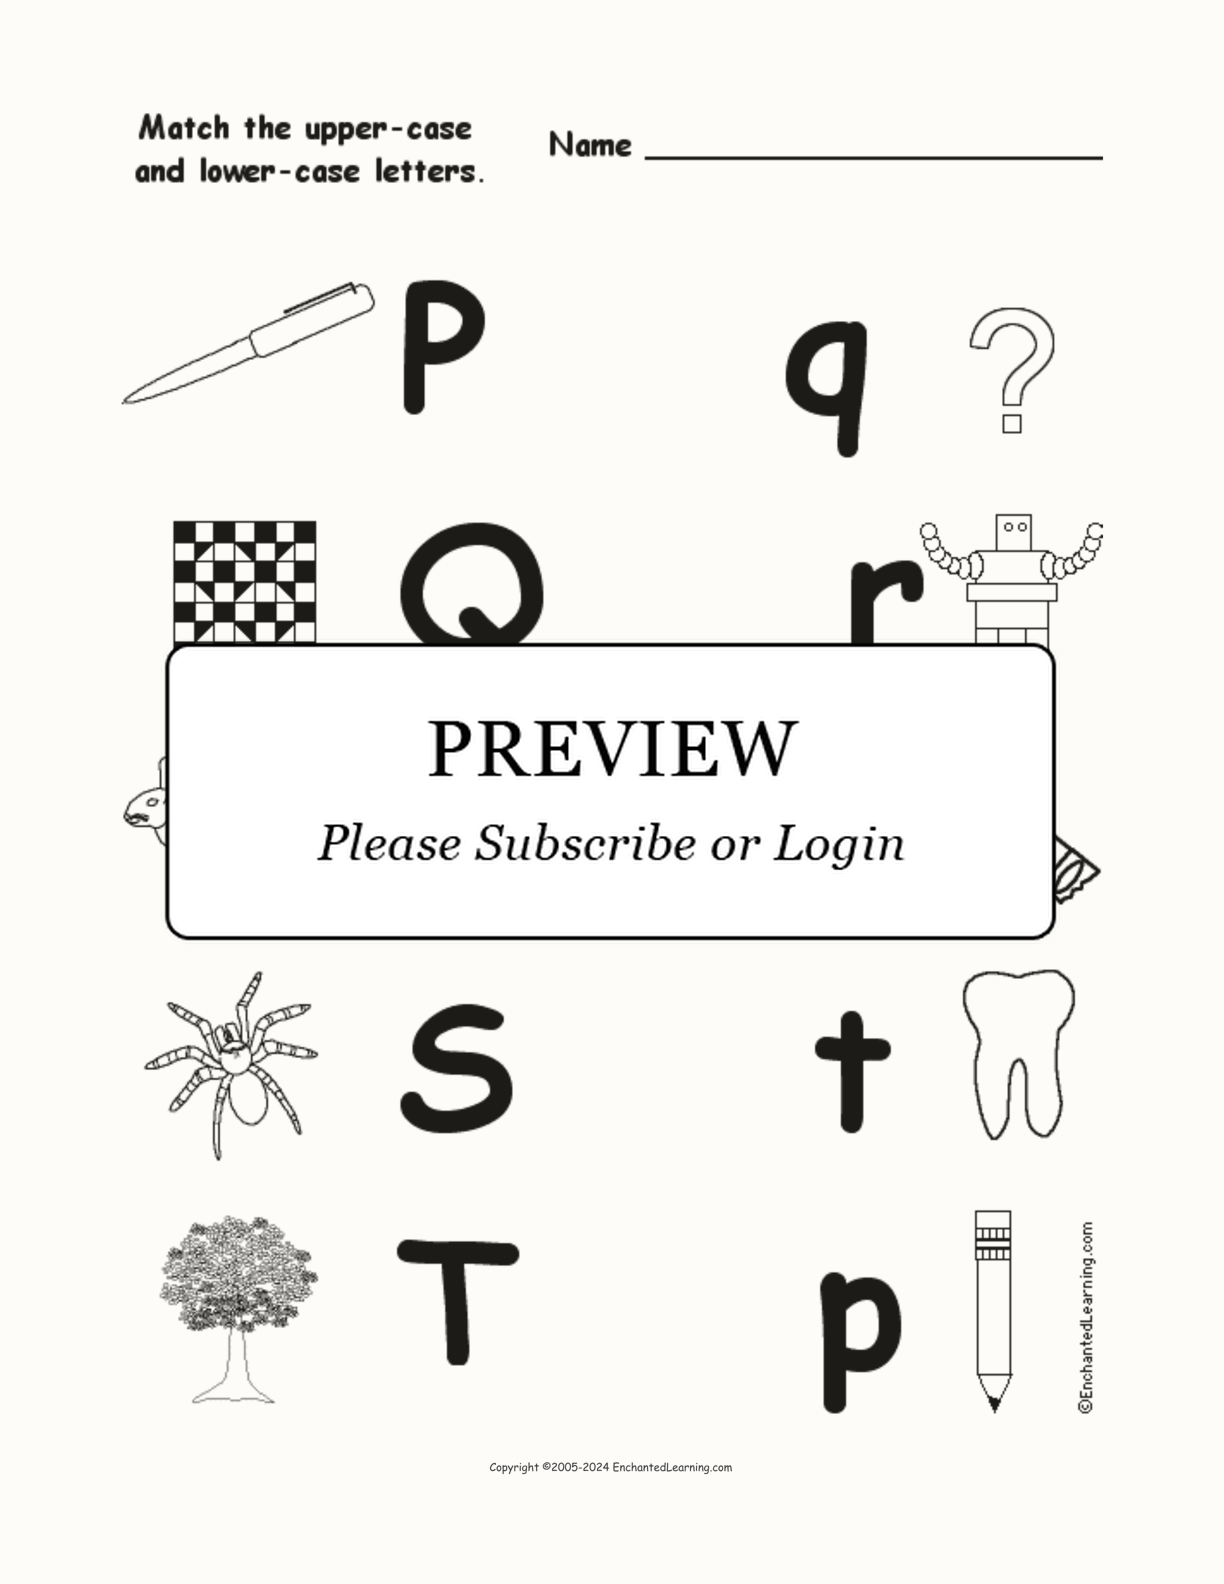 Match Uppercase and Lowercase Letters P-T interactive worksheet page 1